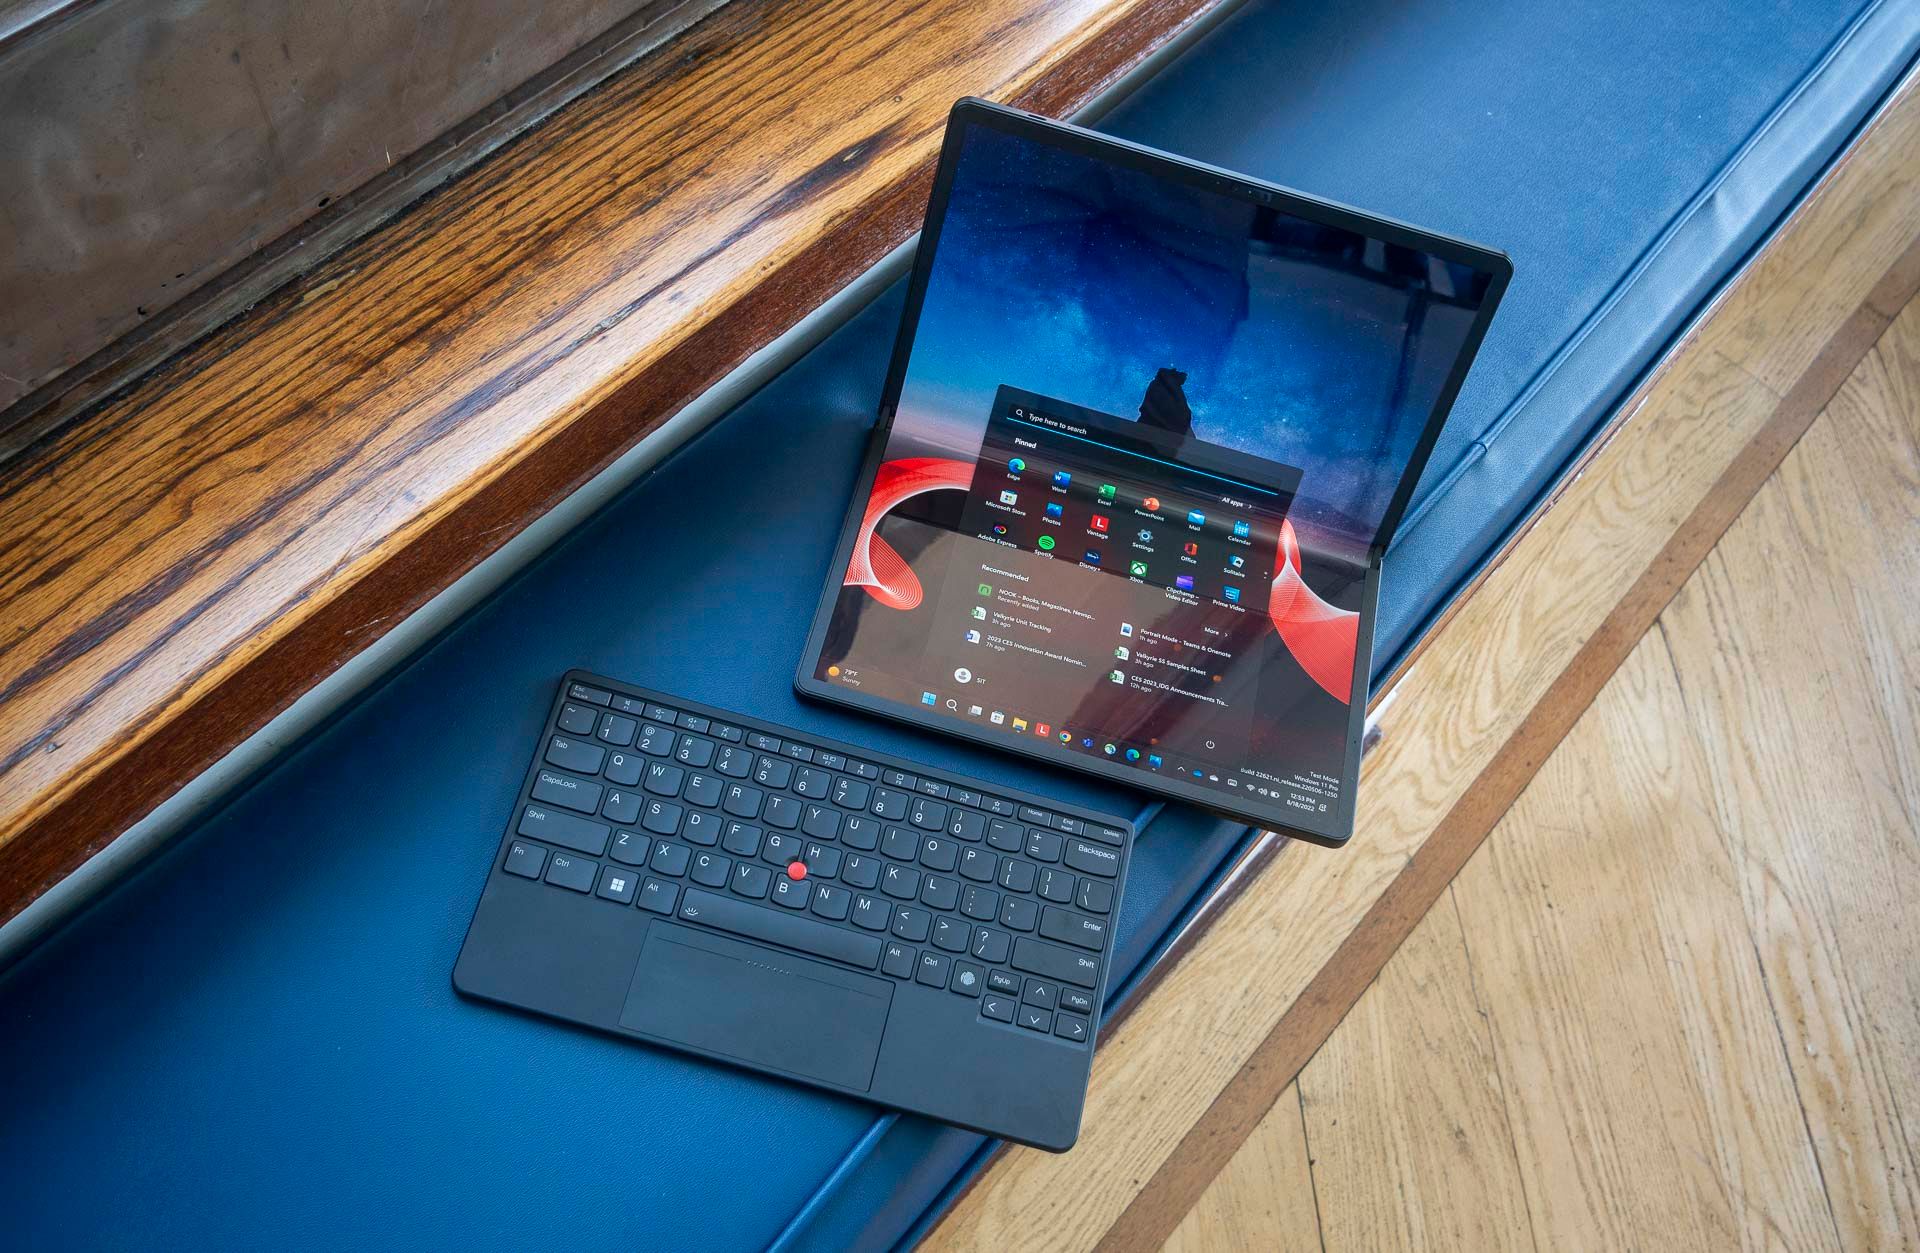 Hands on with the Lenovo ThinkPad X1 Fold - It's awesome! (video)